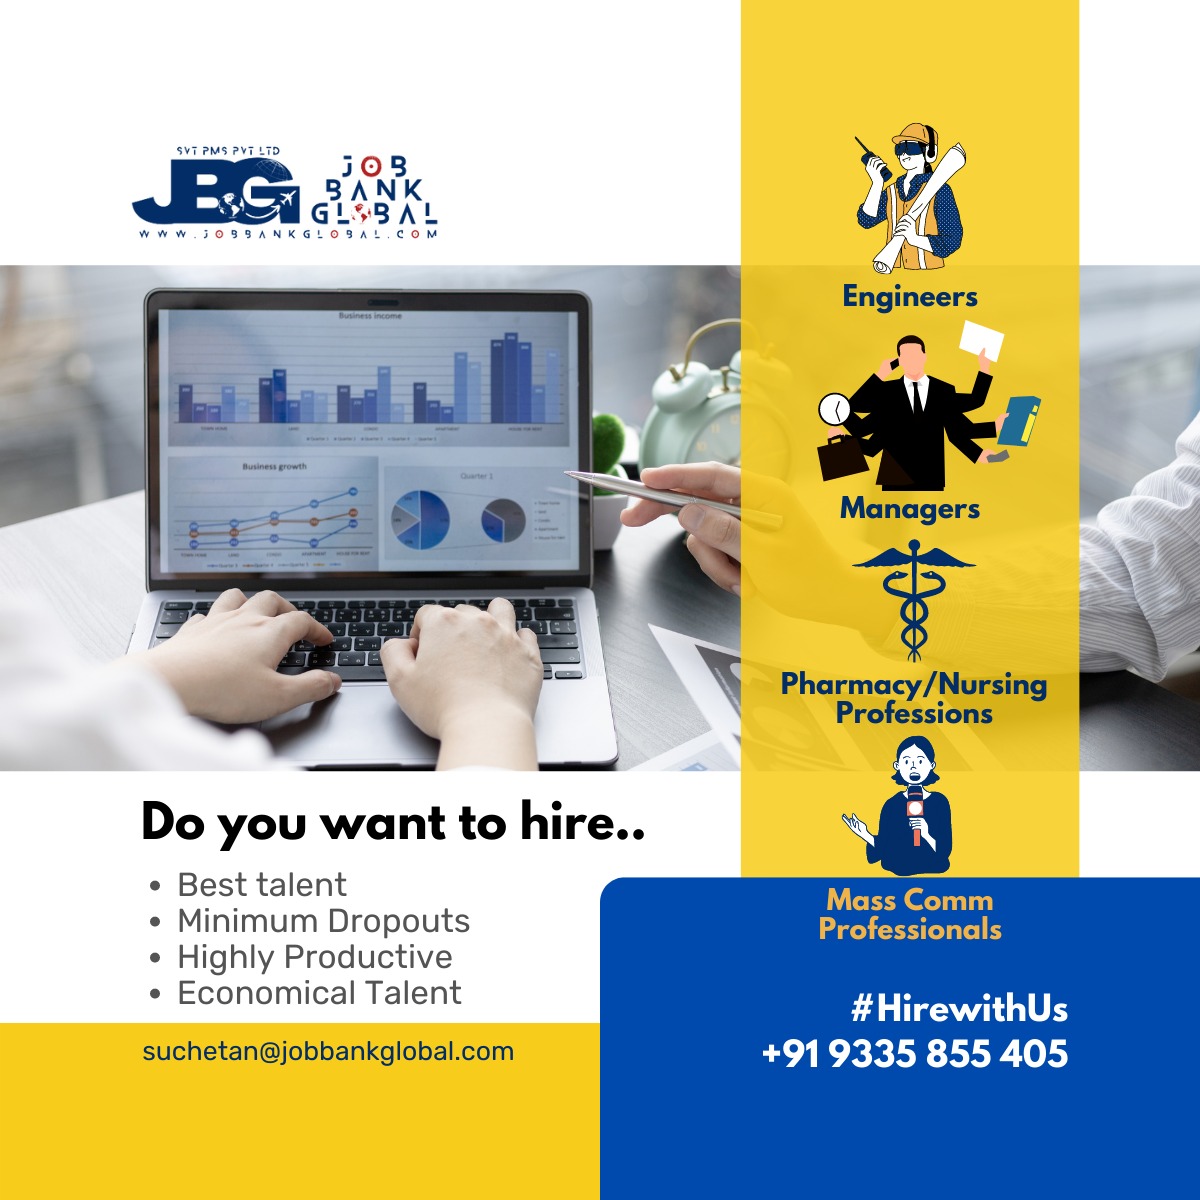 Hire with Us..

#hiring #jobs #jobsearch #recruitment #job #nowhiring #hiring2023 #hirewithus
#hiringfreshers #hiringtalents #hiring2021 #hiring2022 #vacancy #alert #placementcell #campusplacement #delhijobs #noidajobs #newdelhi #student #CRC #colleges #university #btech #BTech